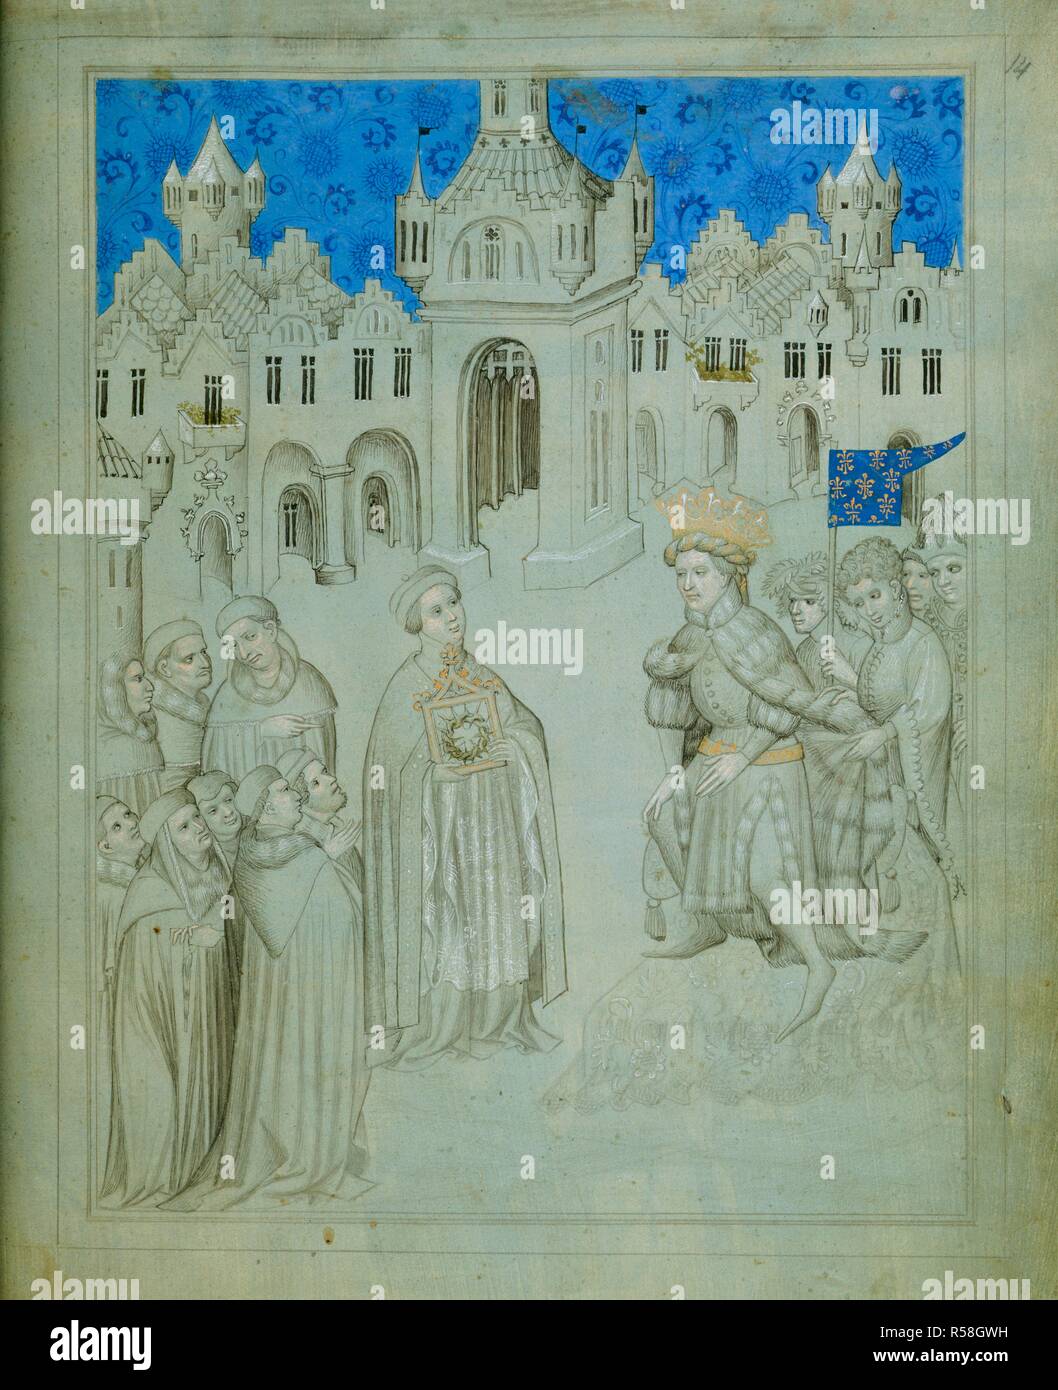 Louis IX and the Crown of Thorns. Picture book of Sir John Mandeville's Travels. Bohemia; circa 1410. [Whole folio] Clergymen bring the Crown of Thorns in a tablet-shaped crystal reliquary to King Louis IX in Paris.The king is wearing an elaborate crown and costume, with fur coat gathered at the neck.There is a detailed architectural background, with entrance gate and fortified towers  Image taken from Picture book of Sir John Mandeville's Travels.  Originally published/produced in Bohemia; circa 1410. . Source: Add. 24189, f.14. Author: MANDEVILLE, SIR JOHN. Master of the Mandeville Travels. Stock Photo